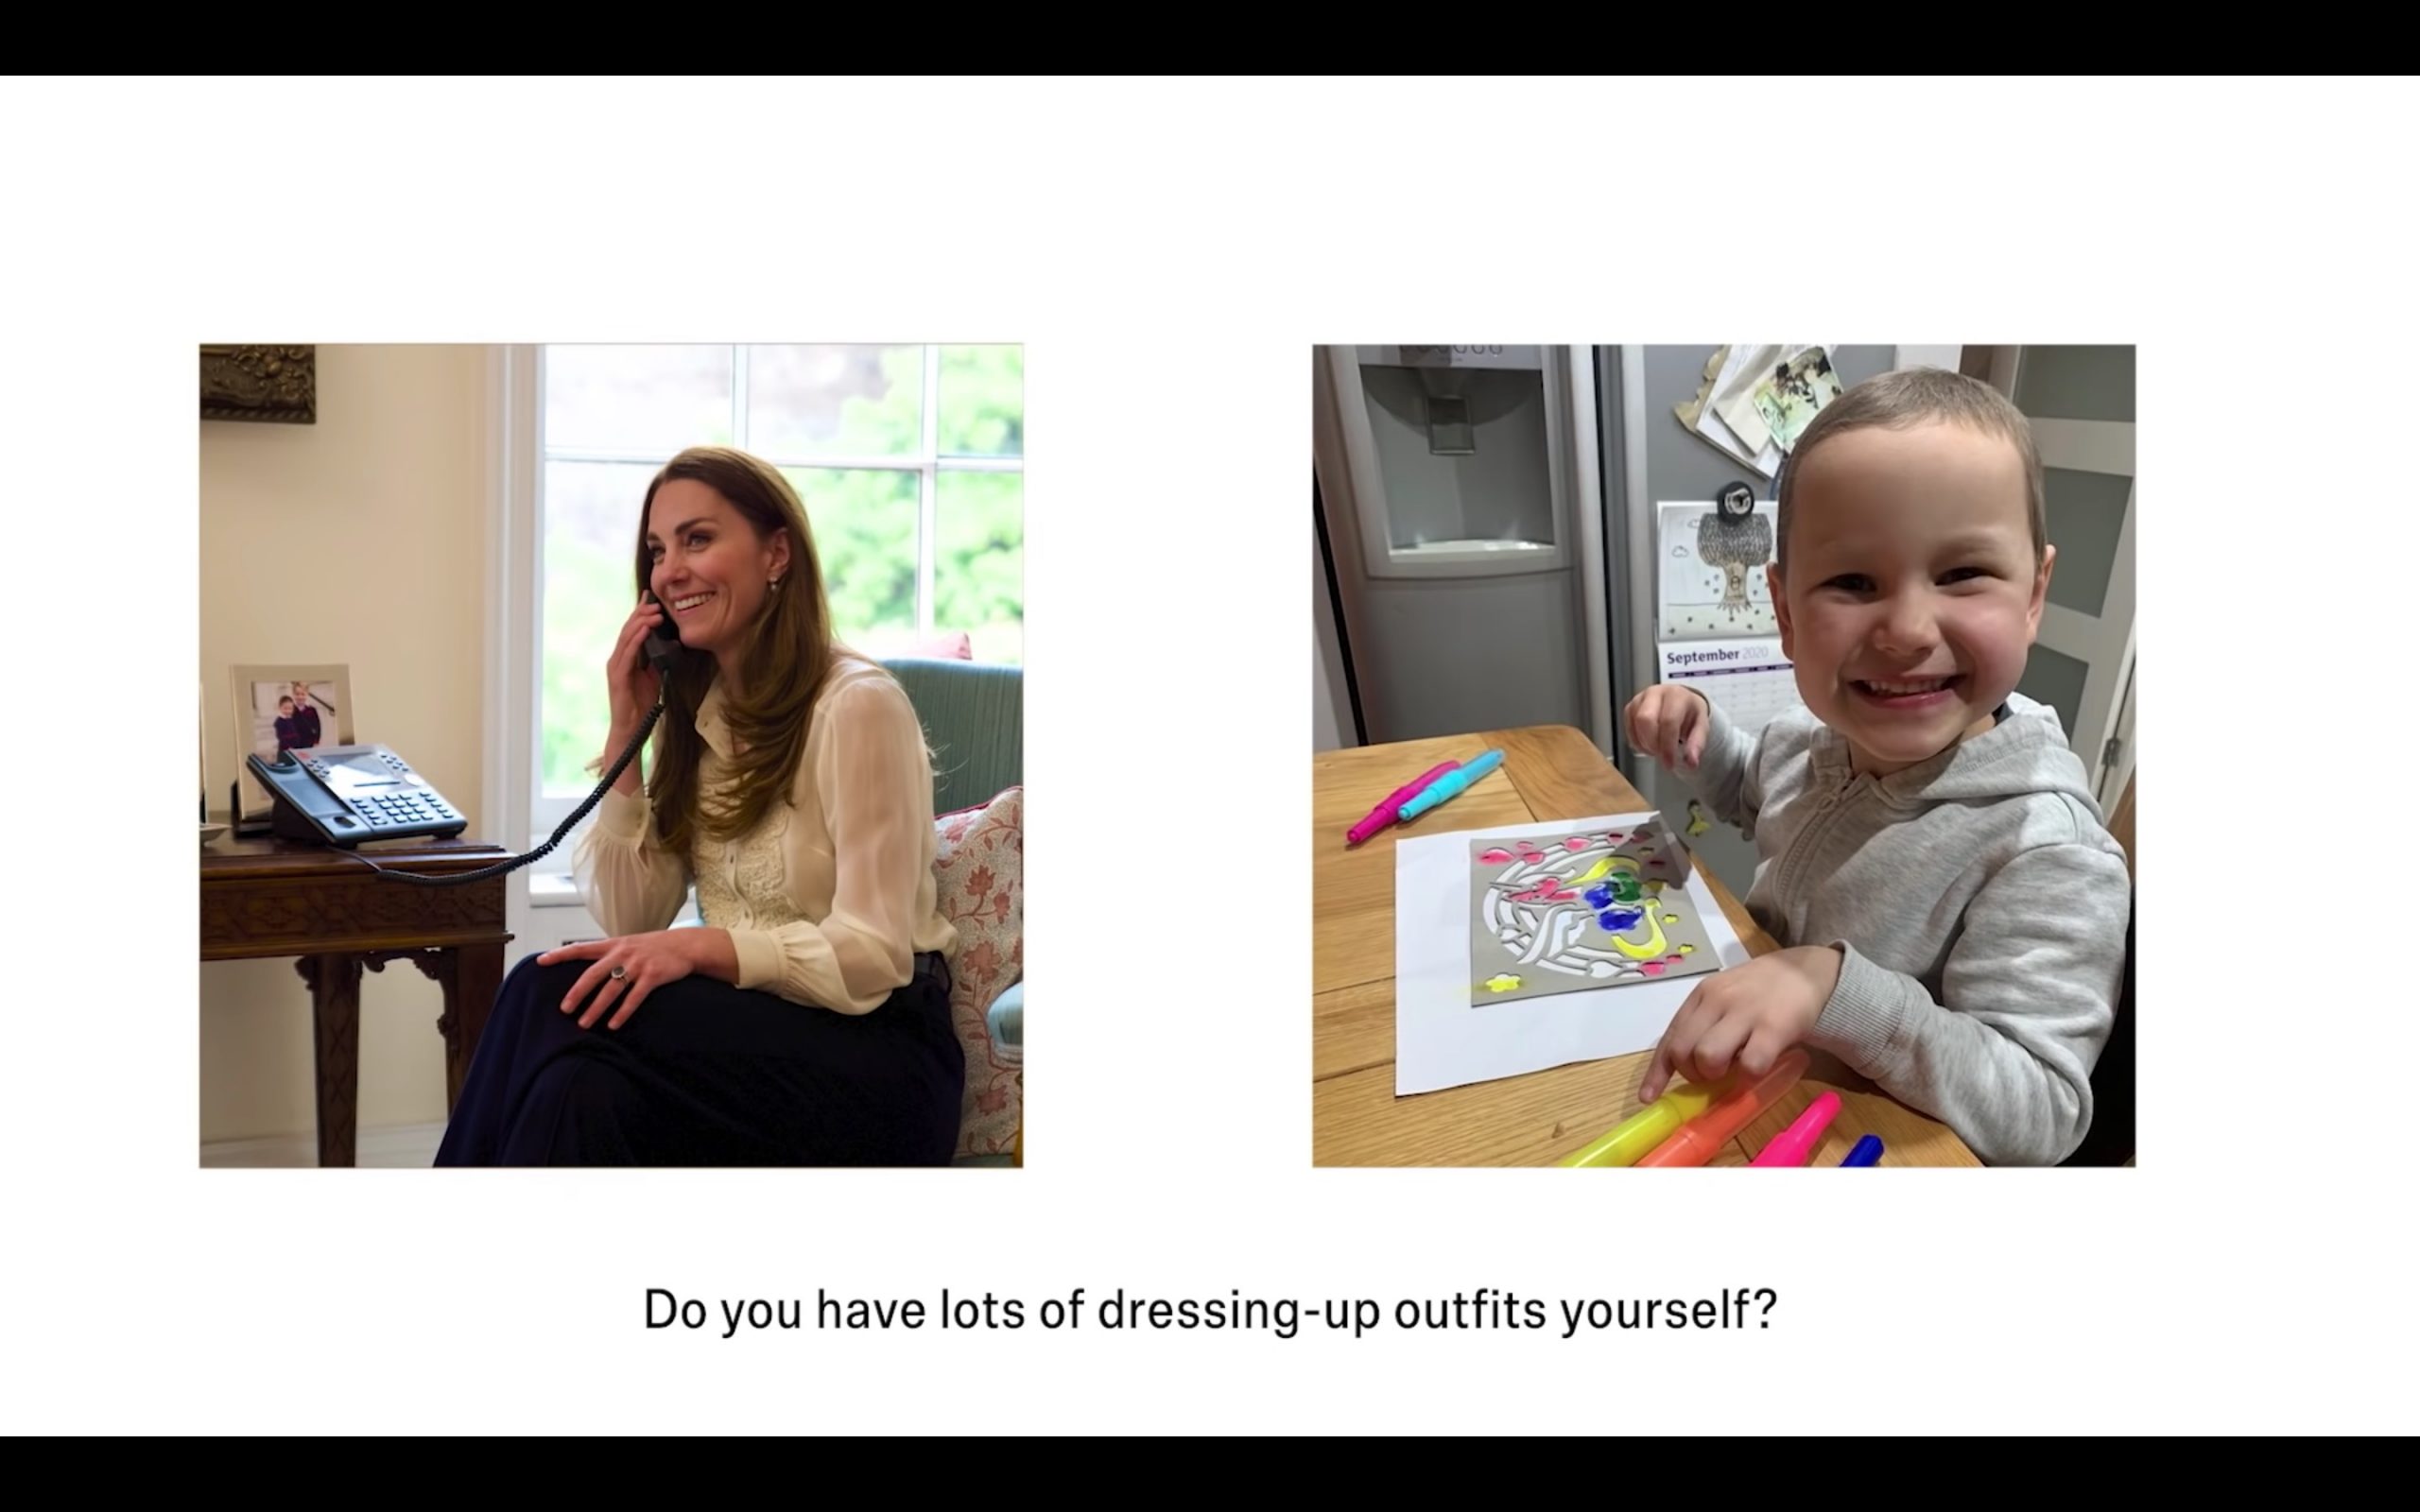 Kate faces left, with her hand on her though, grinning; she is speaking to Mila on the phone. Mila is shown with some hair regrowth, colouring at teh kitchen table with a big grin. in white blouse facing right holds a phone to her ear as she chats to 4-year-old Mila Sneddon, who is shown smilling a wide grin at the camera with her mother; she does not have hair and there is a tube in her nose